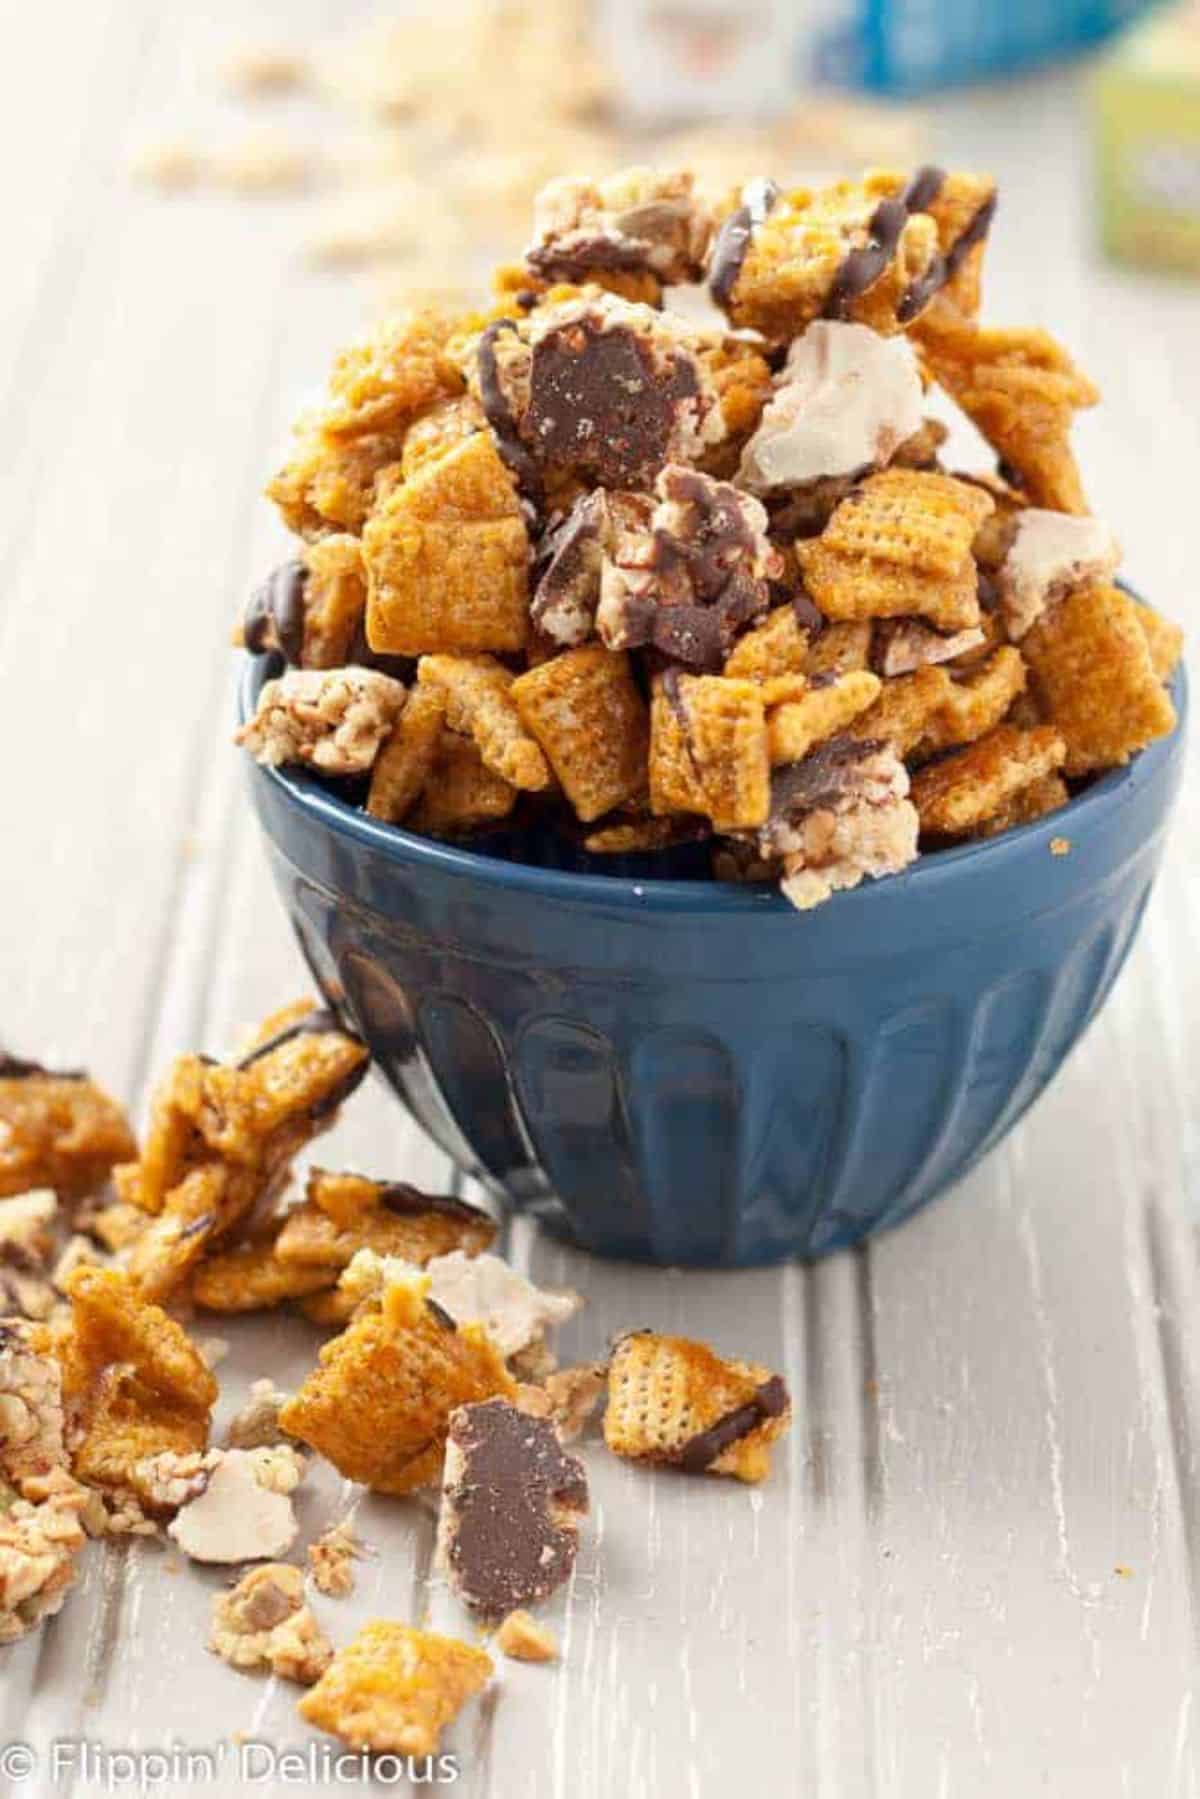 Salted Caramel Chocolate Chex Mix in a blue bowl.